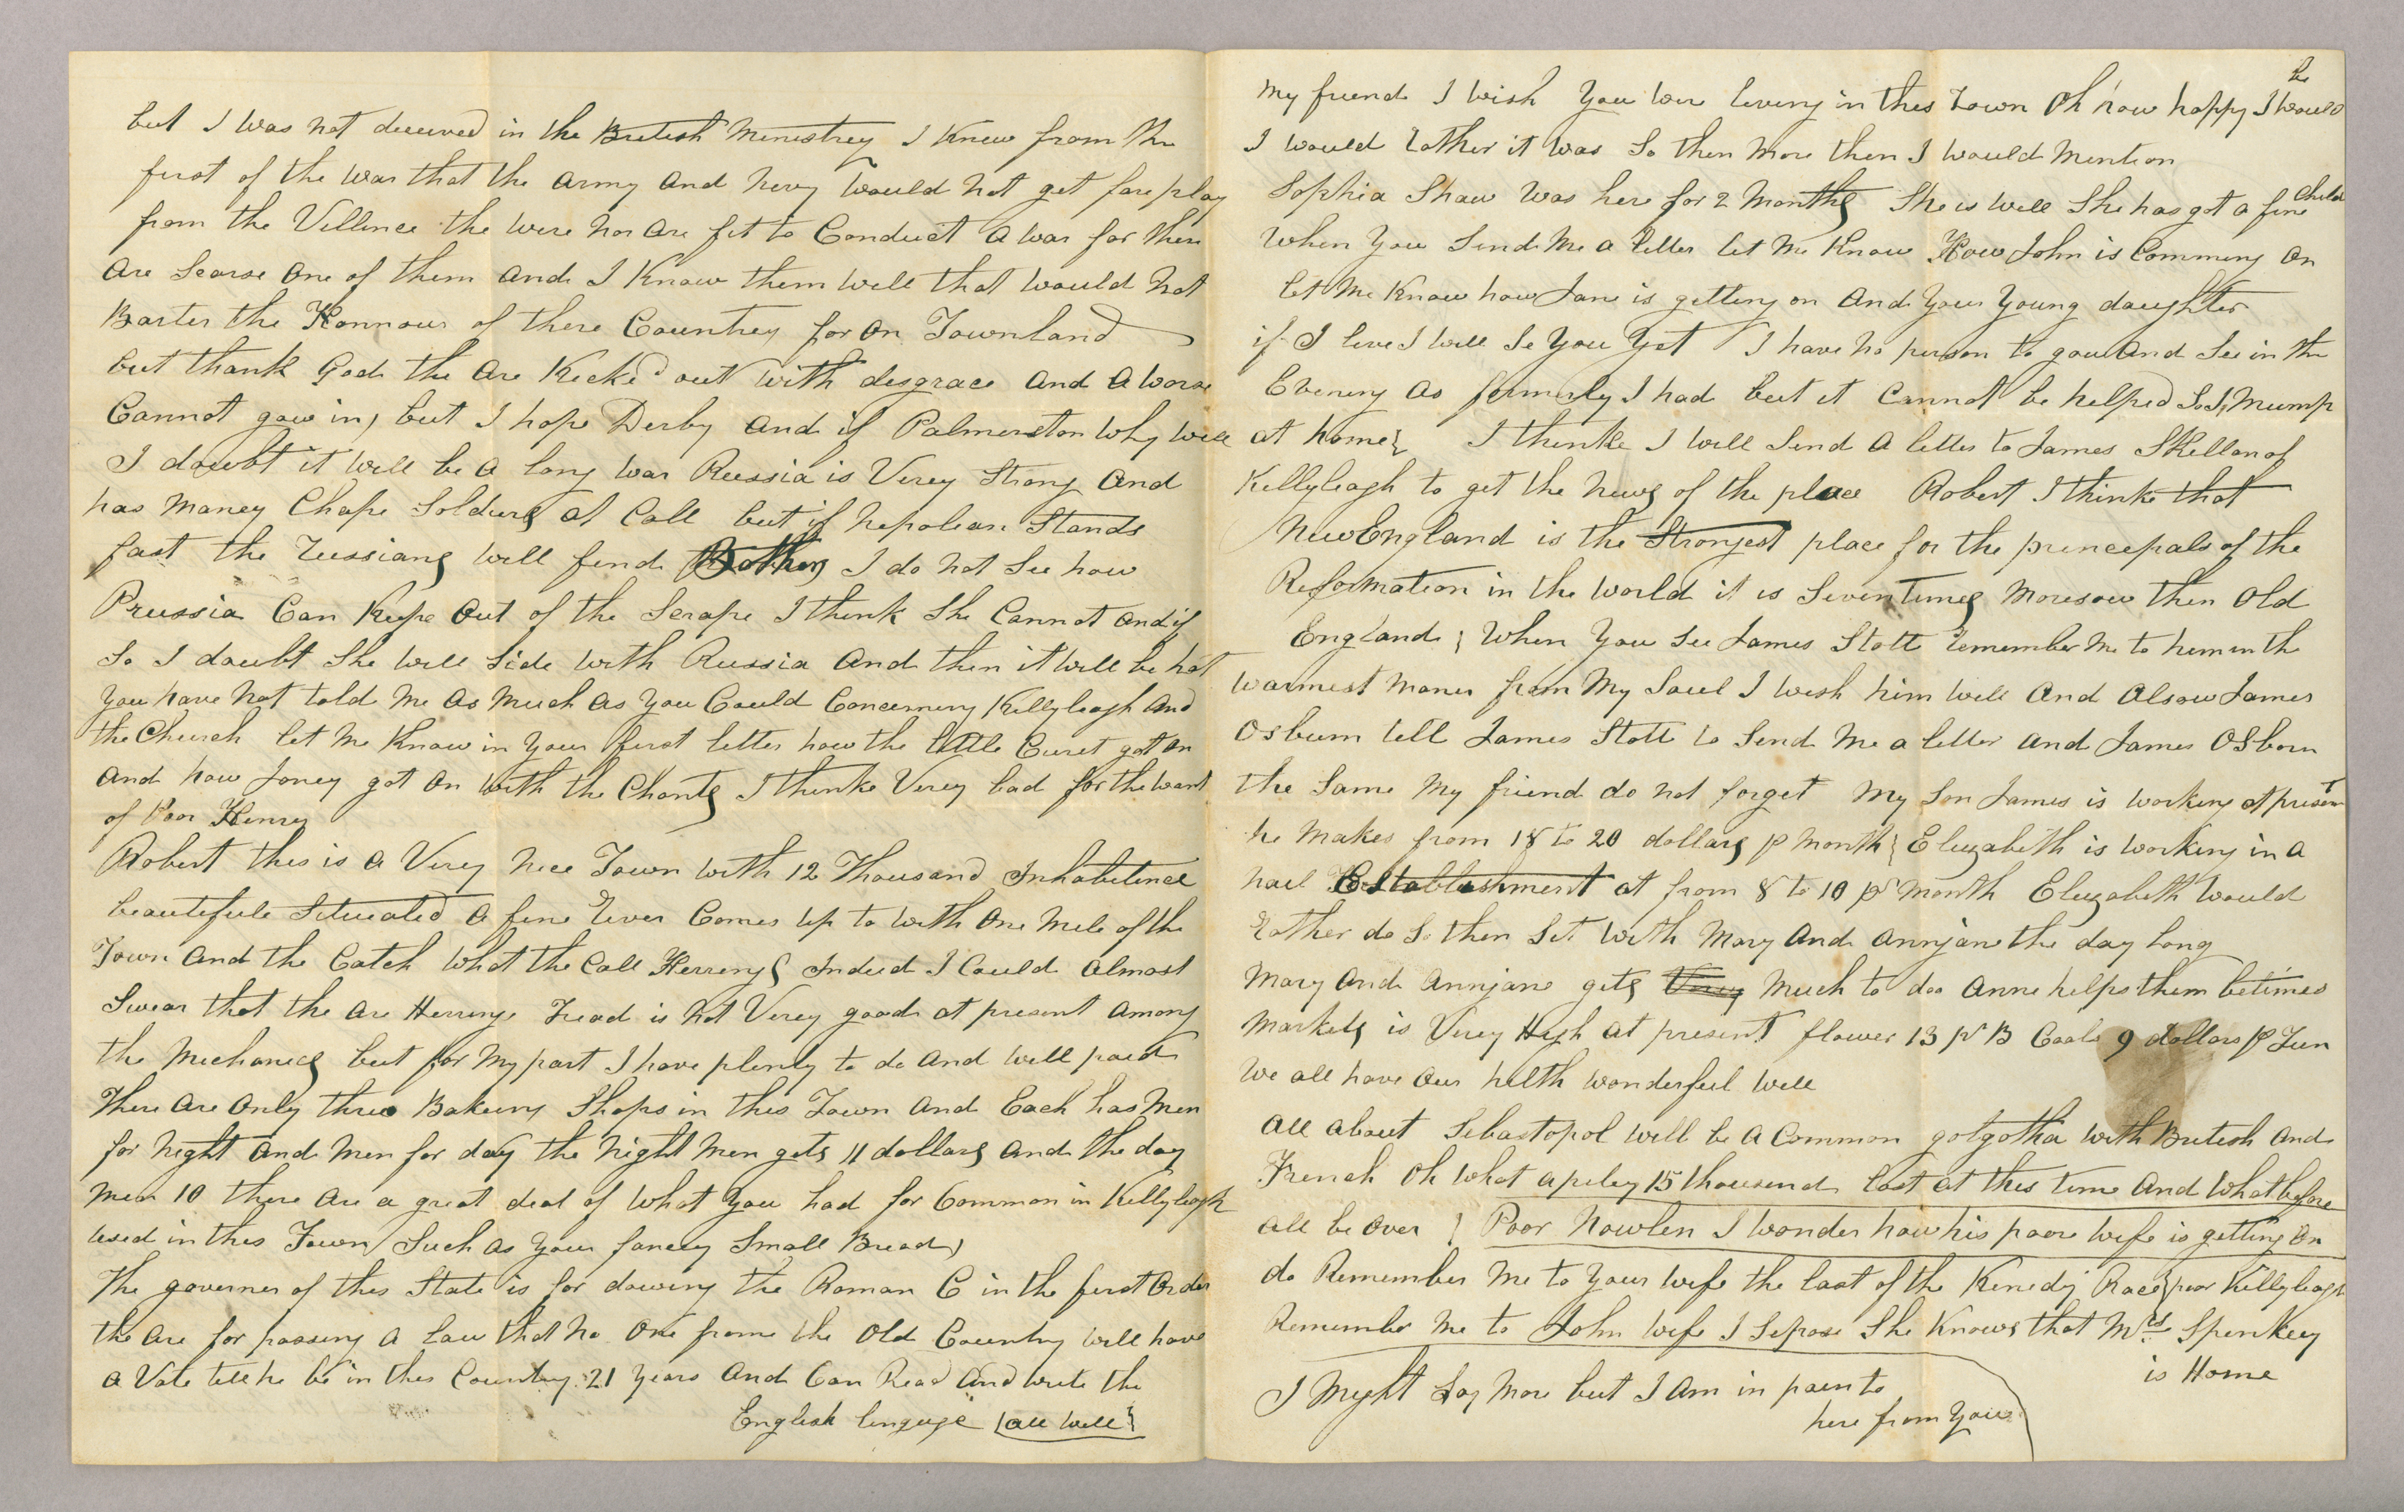 Letter. John Ward, Taunton, Massachusetts, to Robert Brownlee, n. p., Pages 2-3